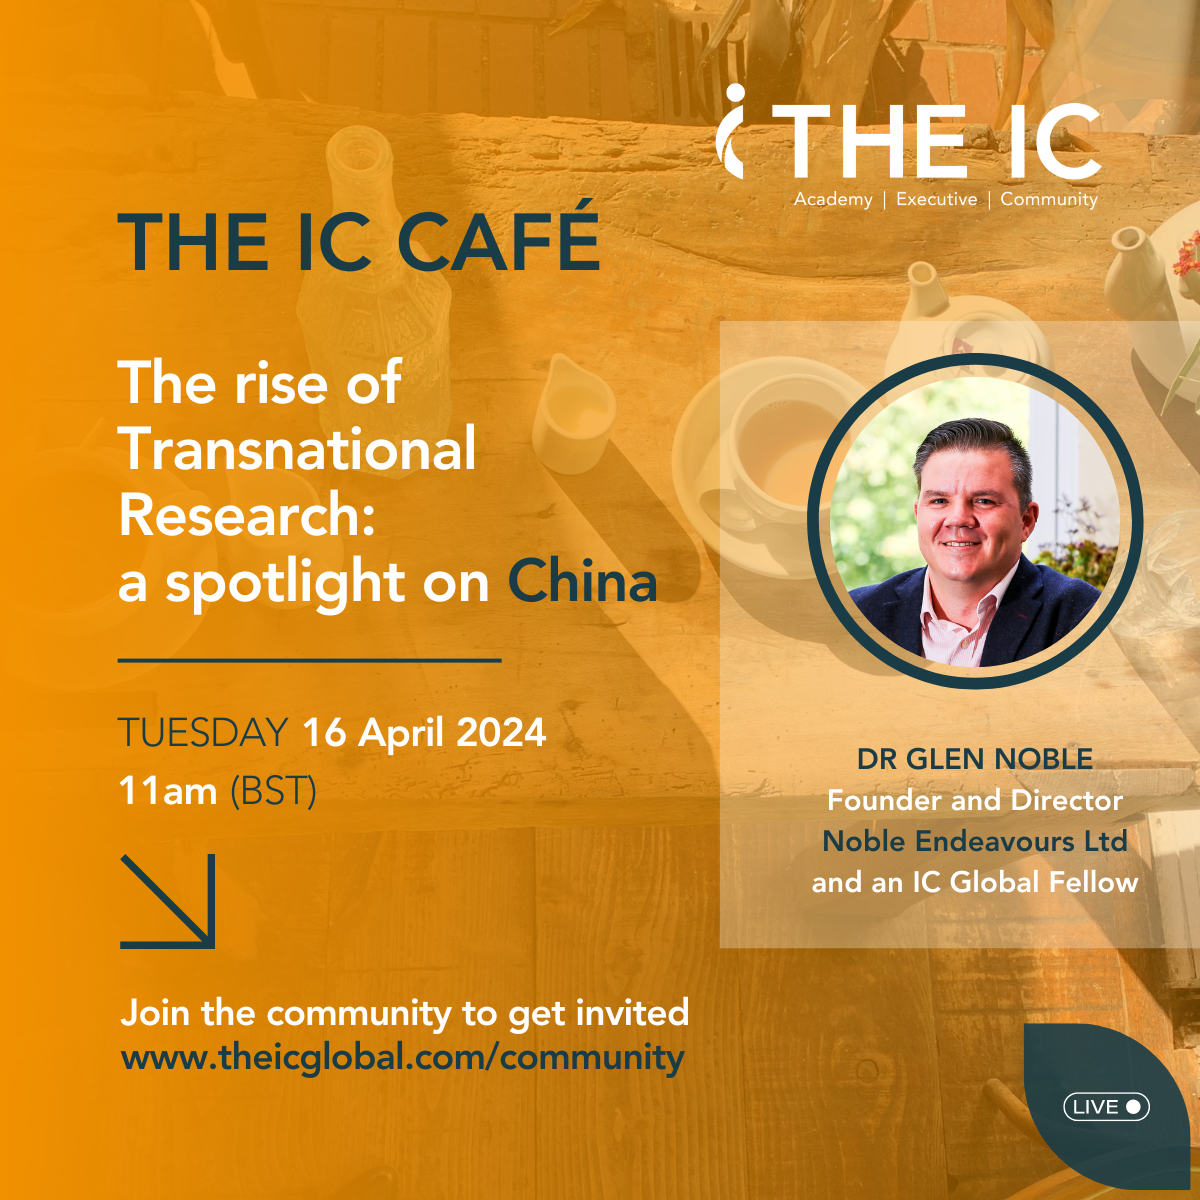 The IC Café: The rise of Transnational Research: a spotlight on China